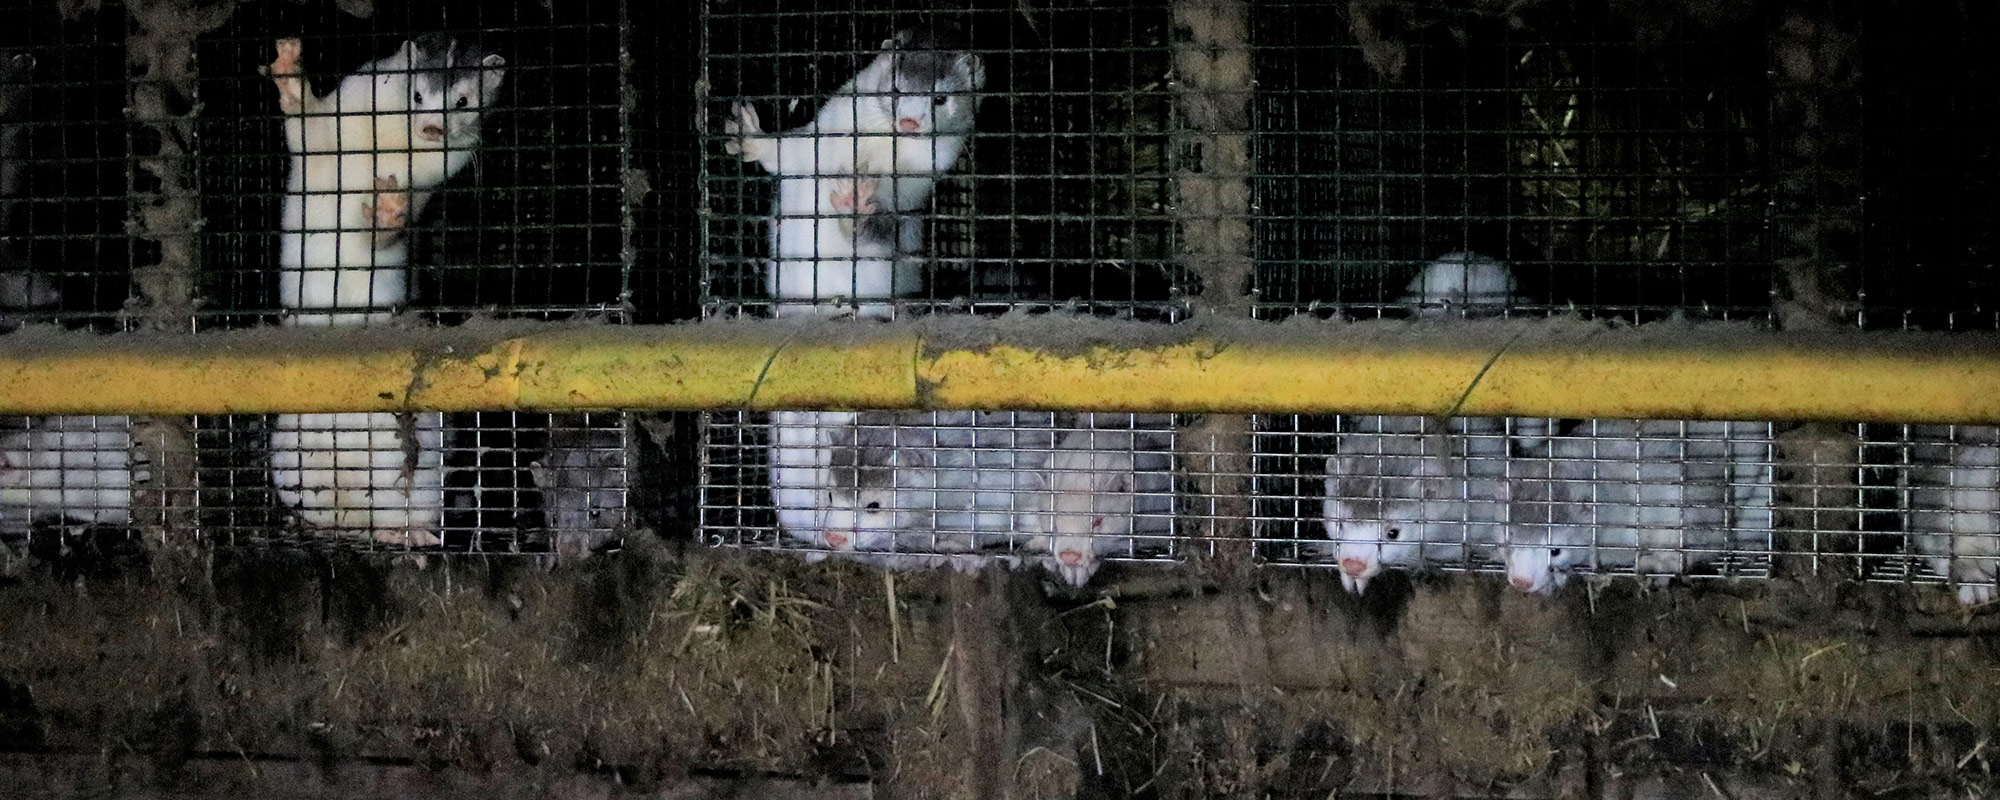 several mink standing in a dirty cage